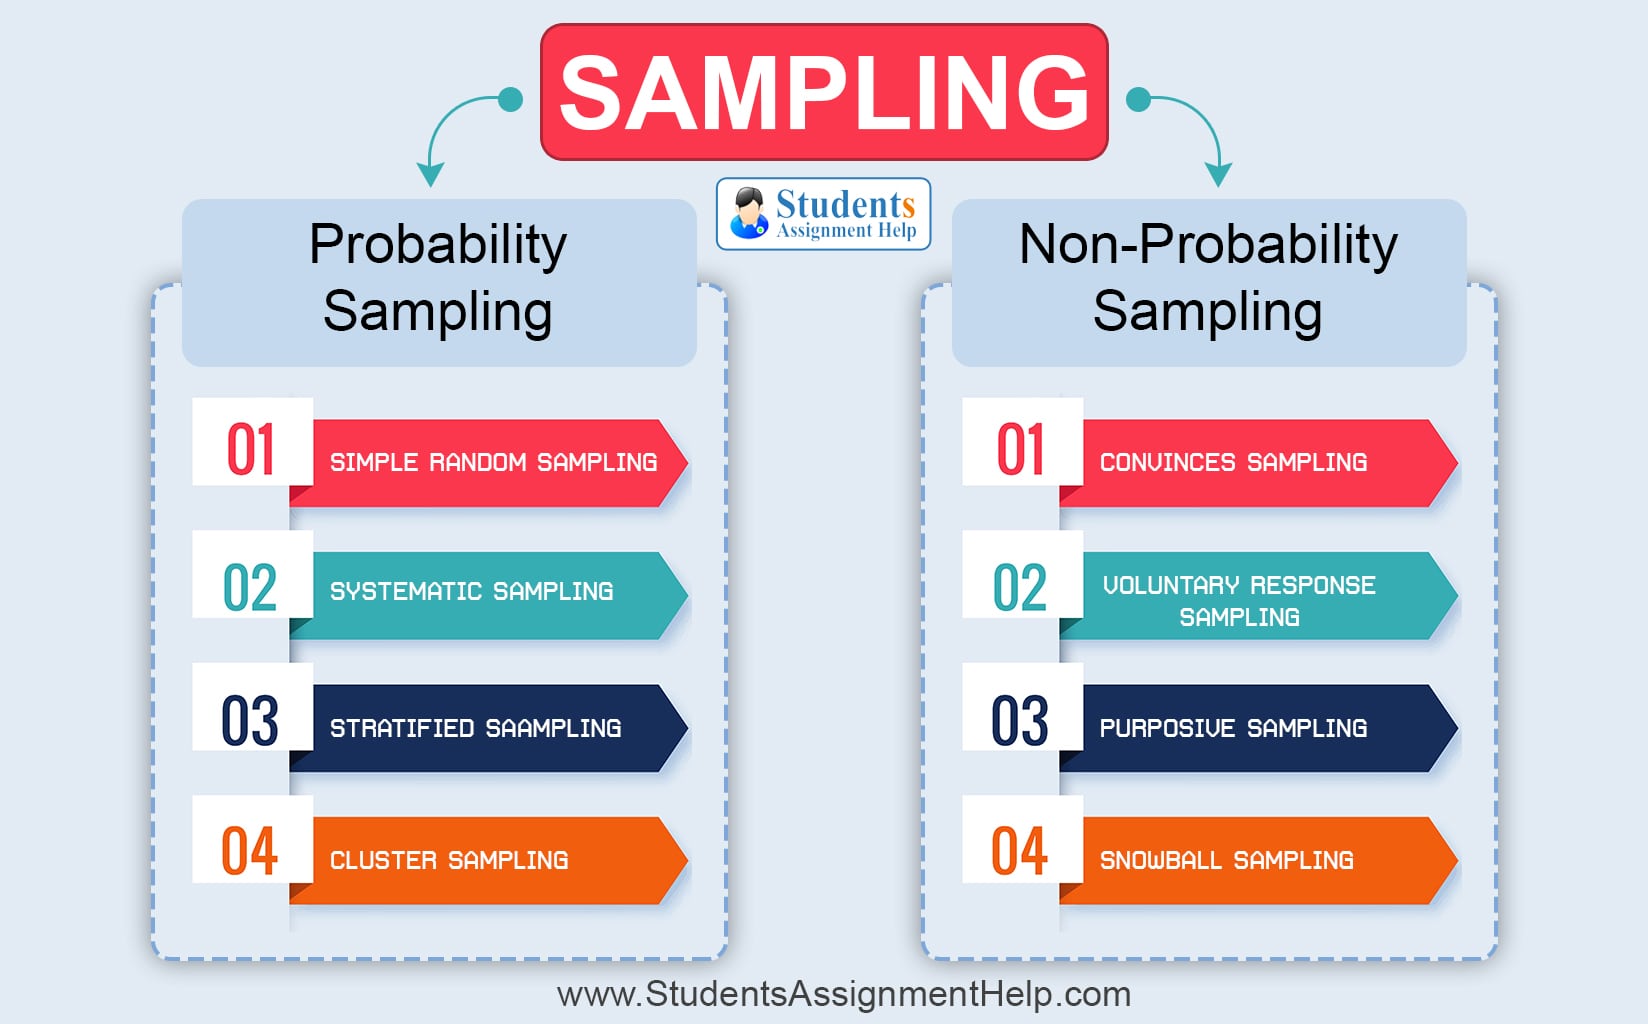 research about the sampling